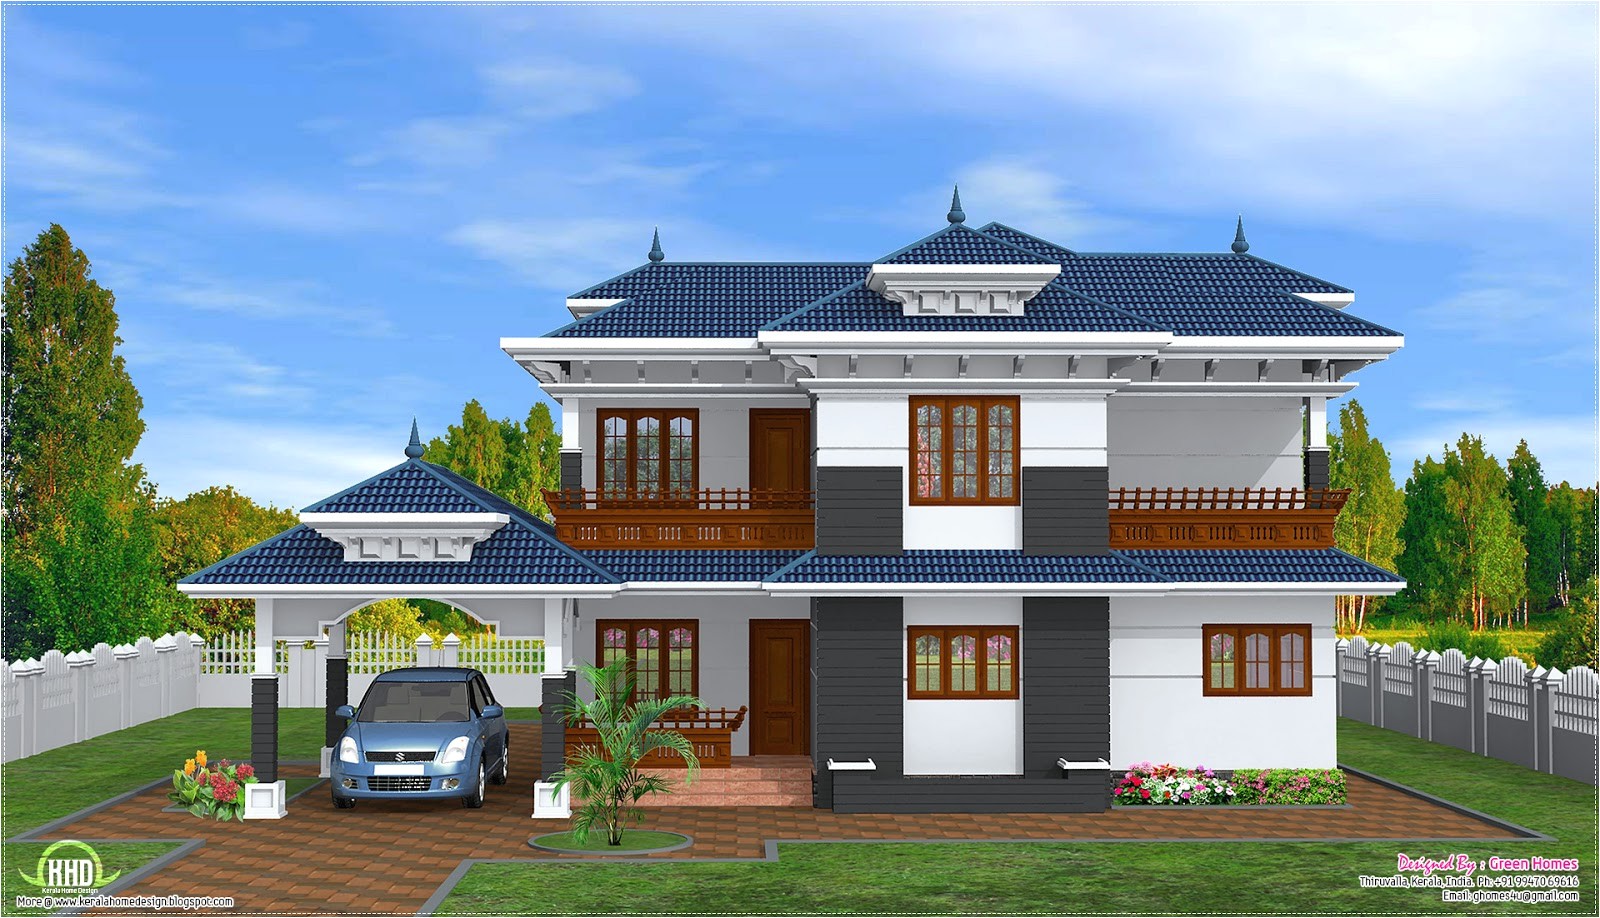 Home Designs Plans February 2013 Kerala Home Design and Floor Plans